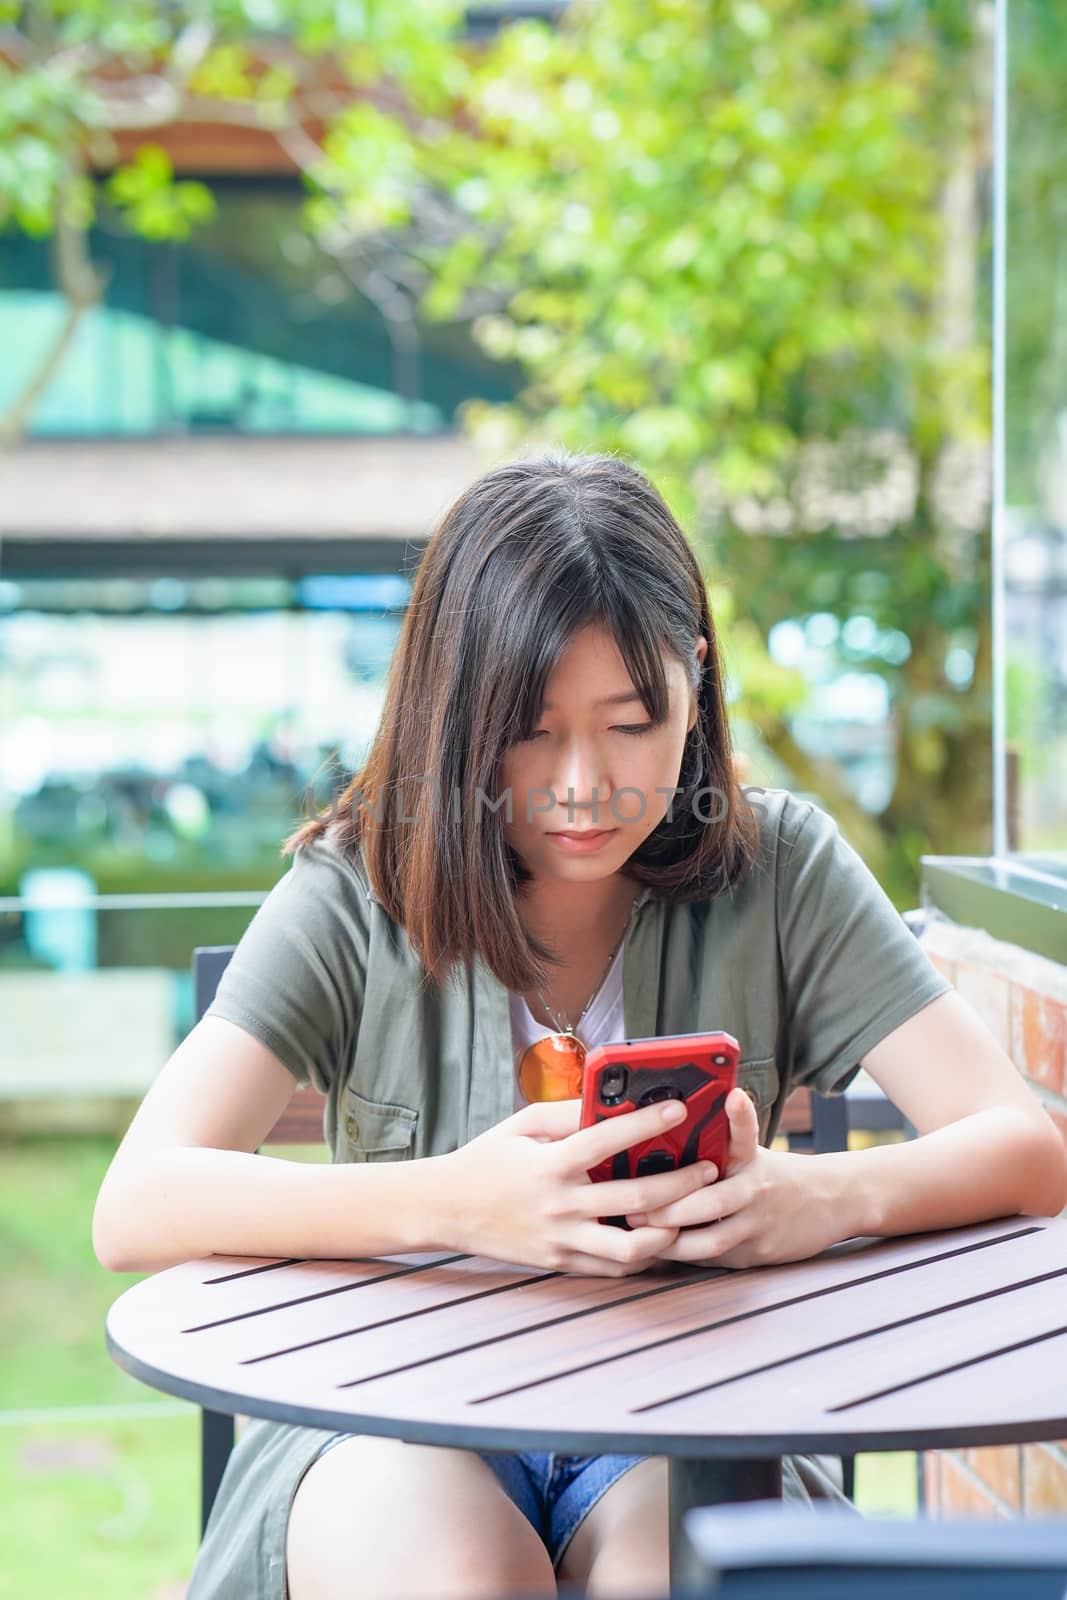 Pretty woman sitting in a cafe terrace use smartphone